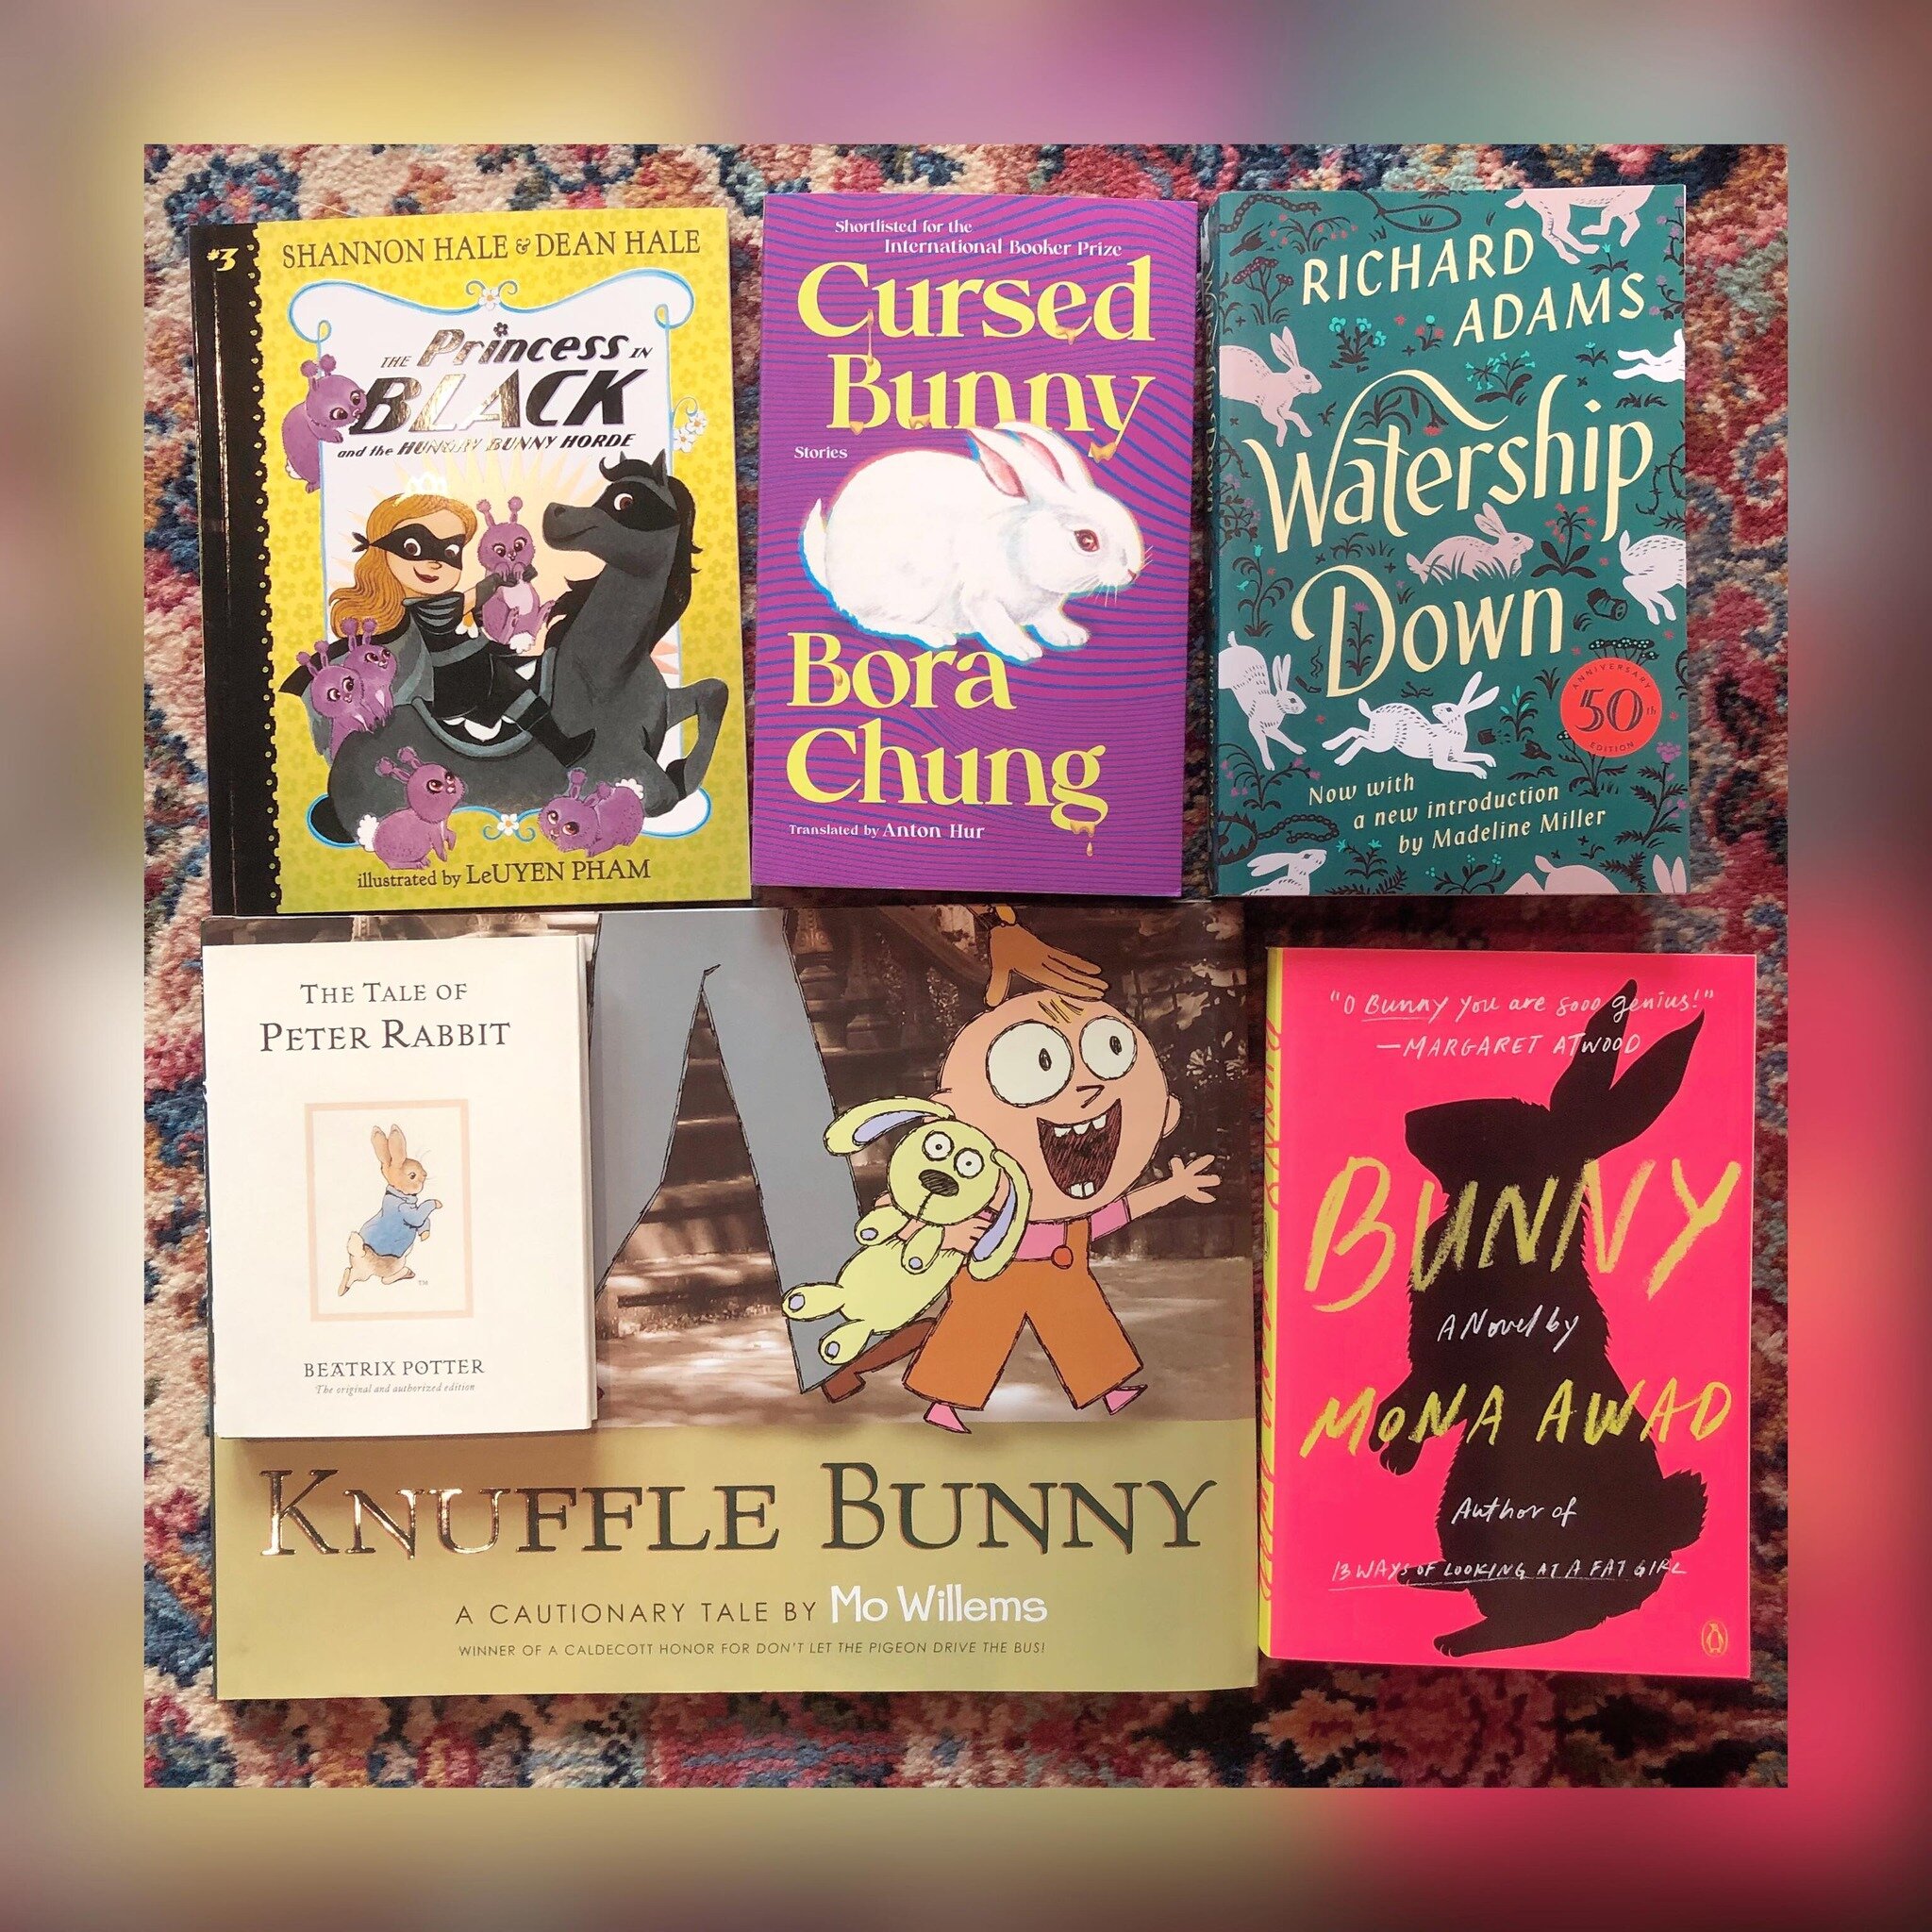 Hop on down to Glendora Bookshop and hunt for the perfect read this weekend, open Easter Sunday 12-4pm! 🪩🐇🌷🐰

*****

#independentbookstore #booklovers #rabbitreads #spring #indiebookstore #glendorabookshopmi #easter #tbr #indiebookstore